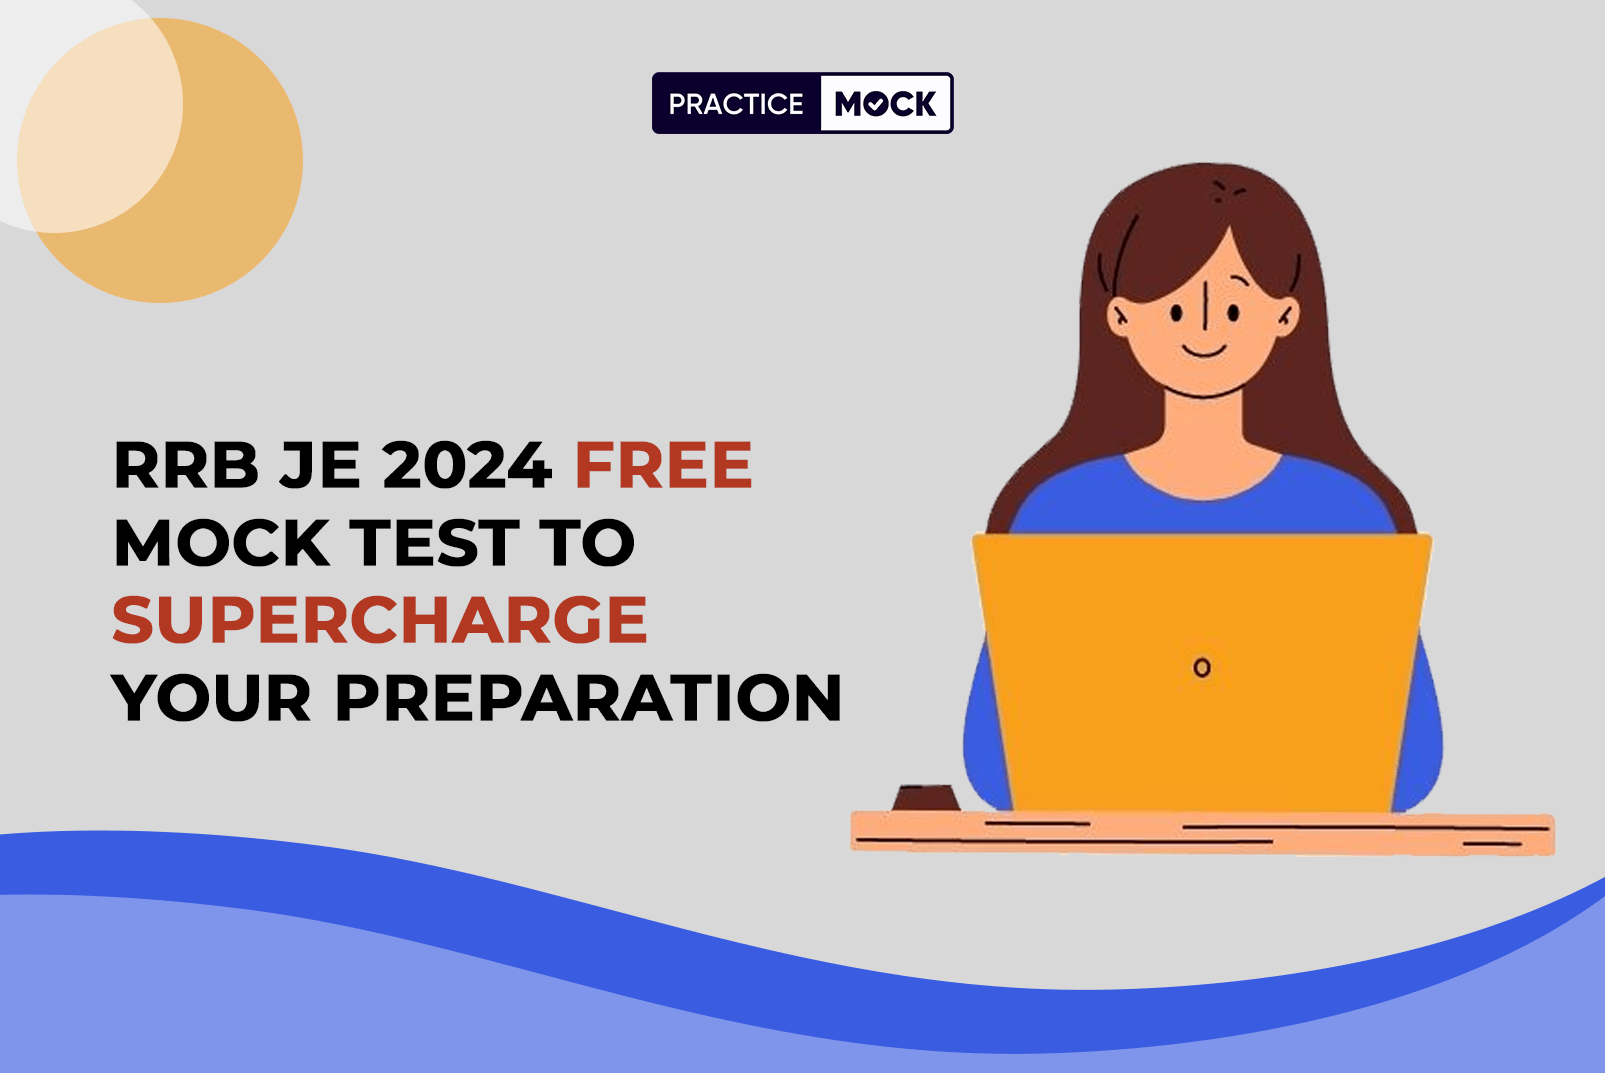 RRB JE 2024 Free Mock Test to Supercharge Your Preparation